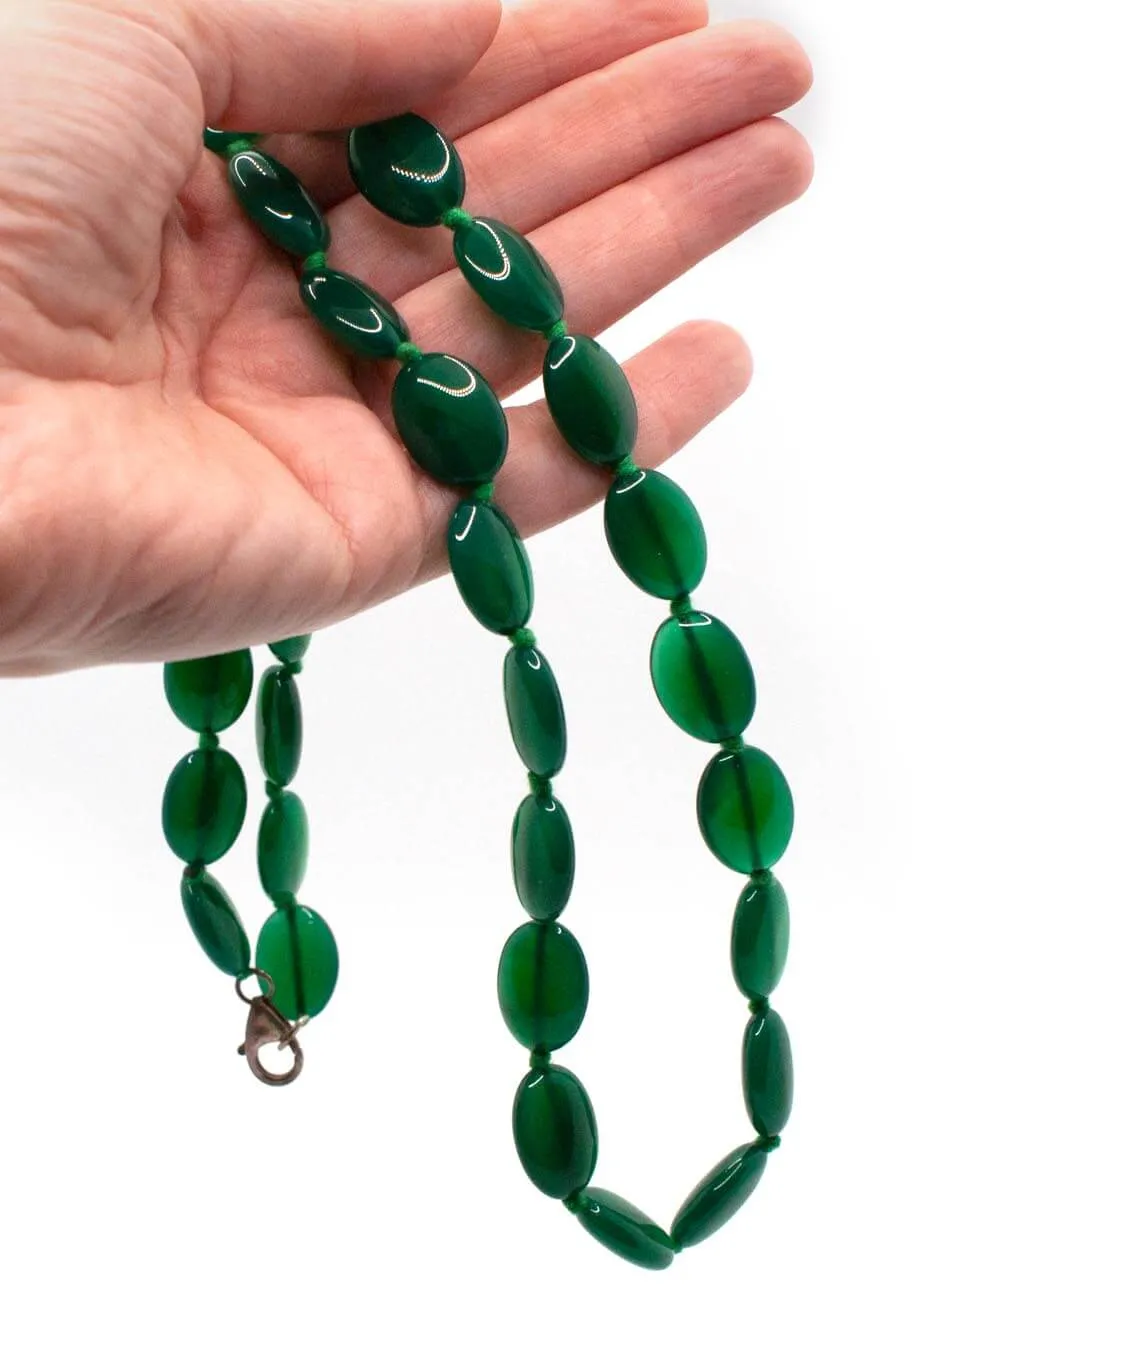 Vintage 1930s green glass bead necklace